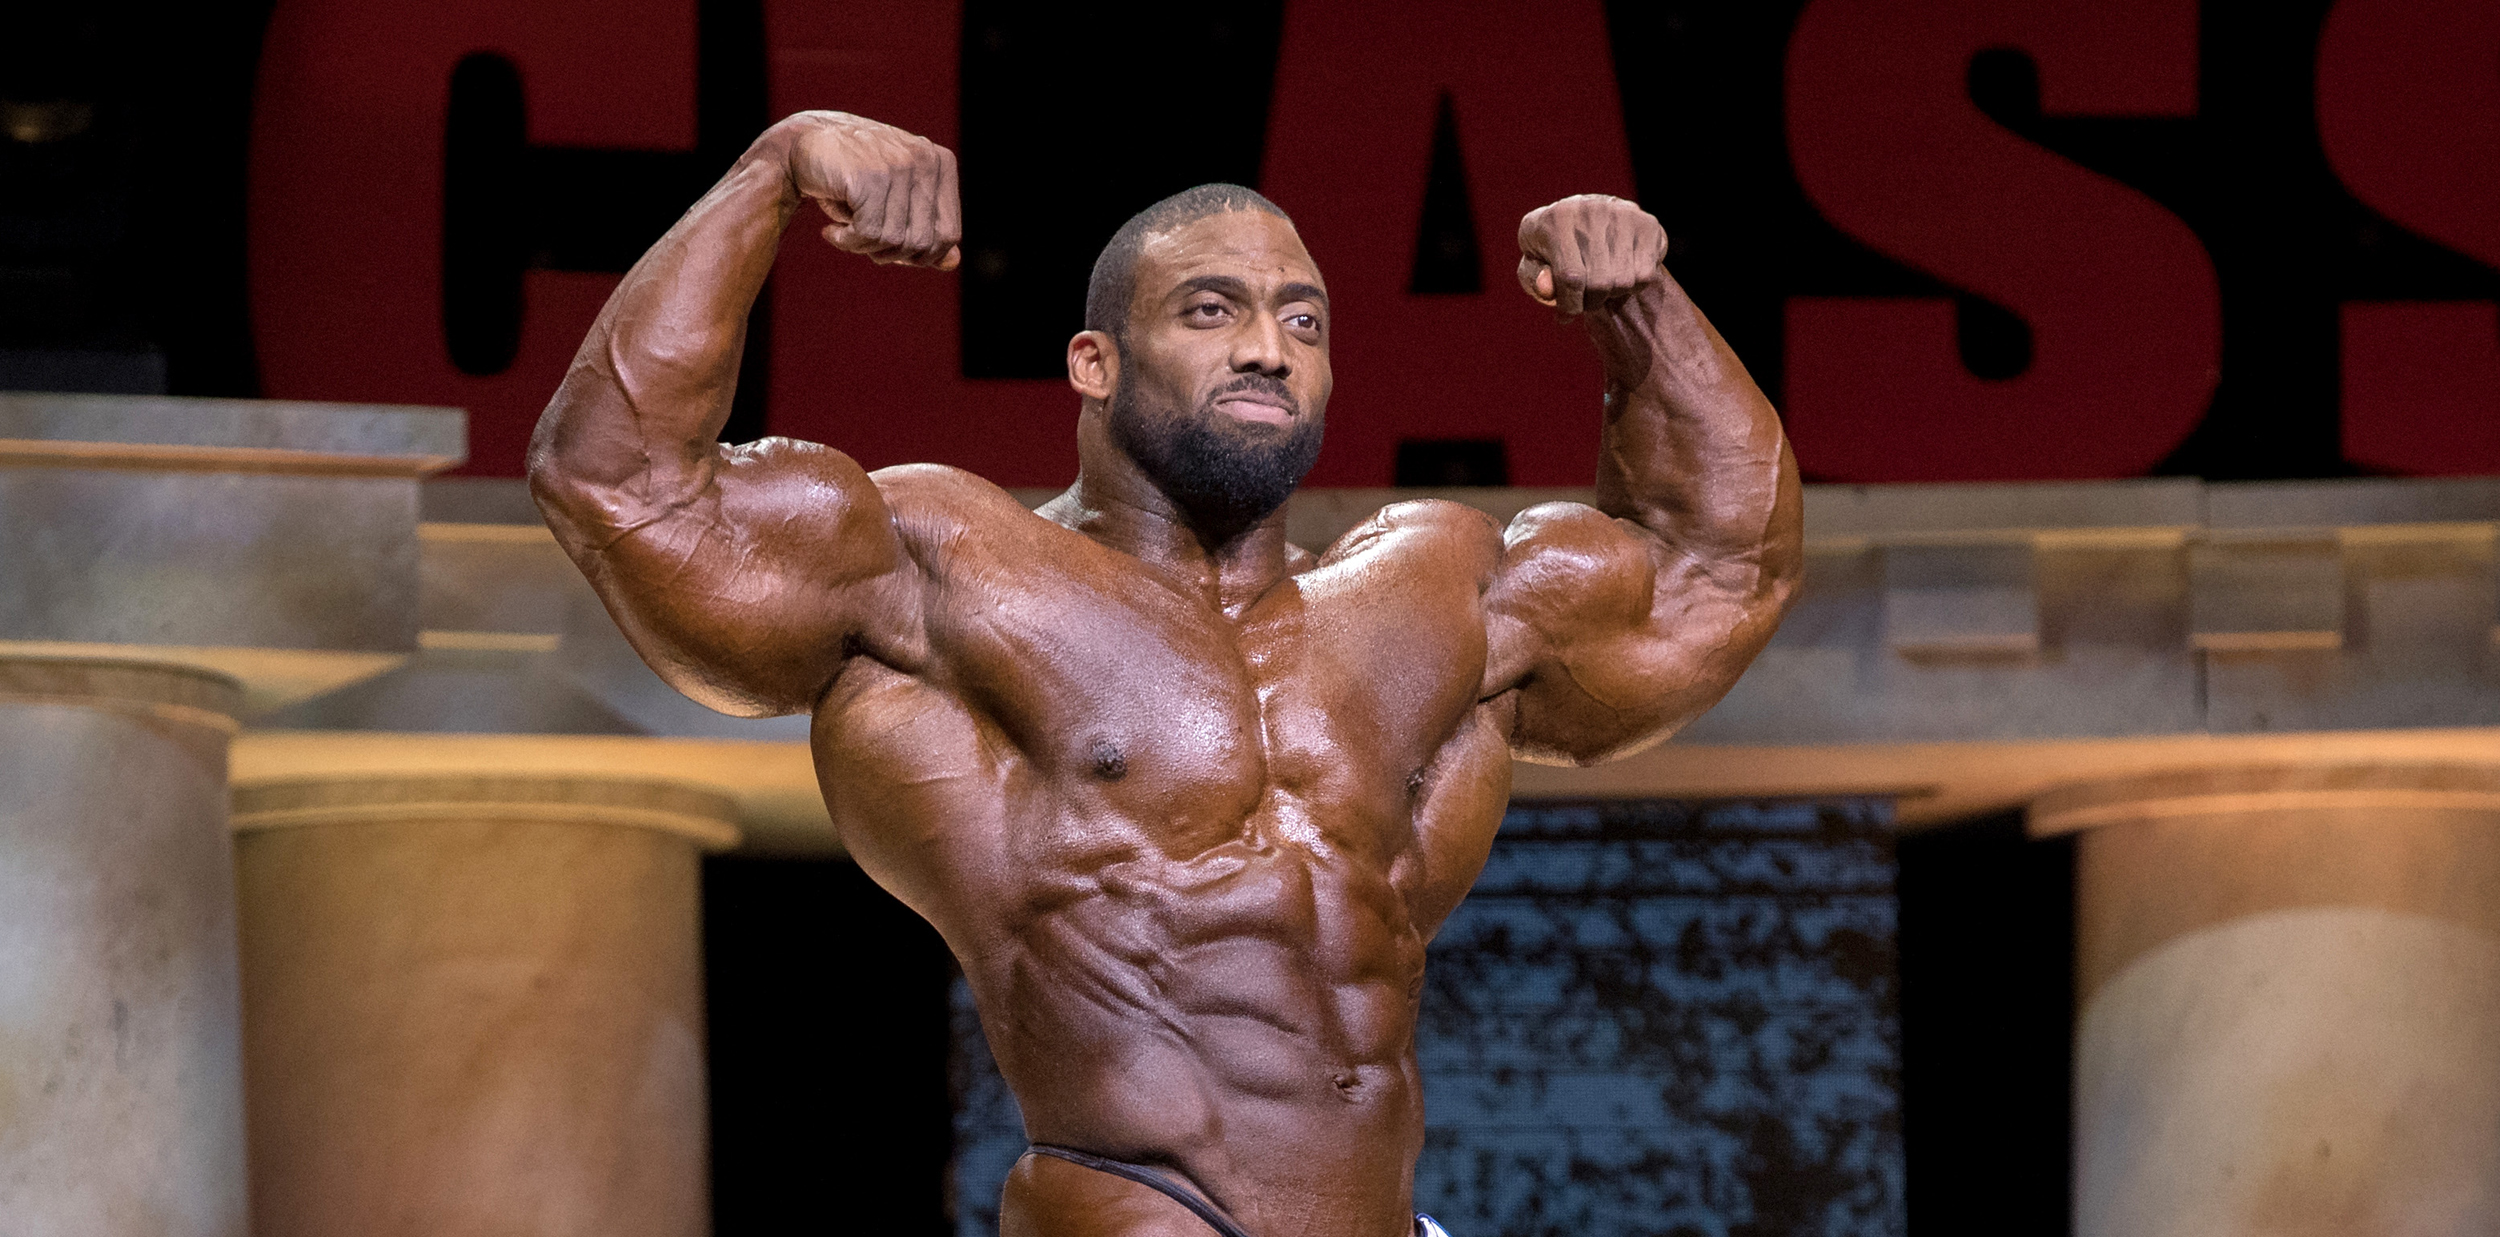 Looks Old Enough to Be My Dad  23YearOld Bodybuilder Shocks the World  after Revealing Himself